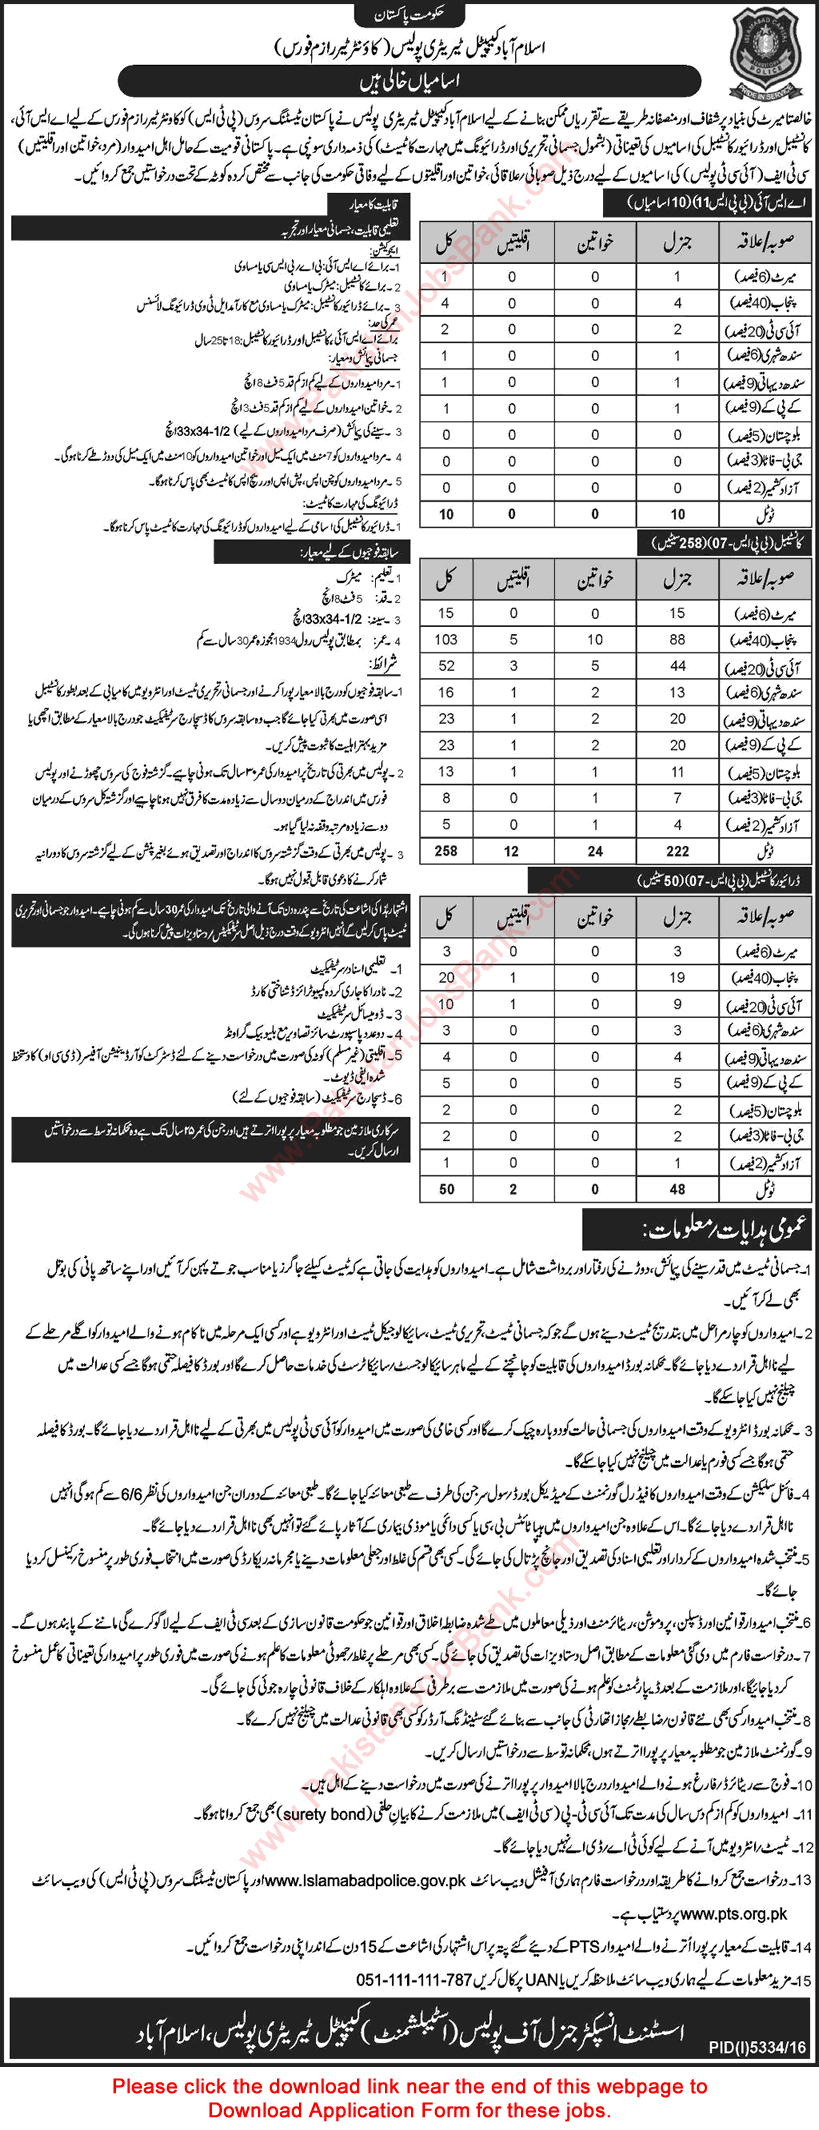 Islamabad Police Jobs 2017 April PTS Application Form Counter Terrorism Force Constables, ASI & Driver Constables Latest